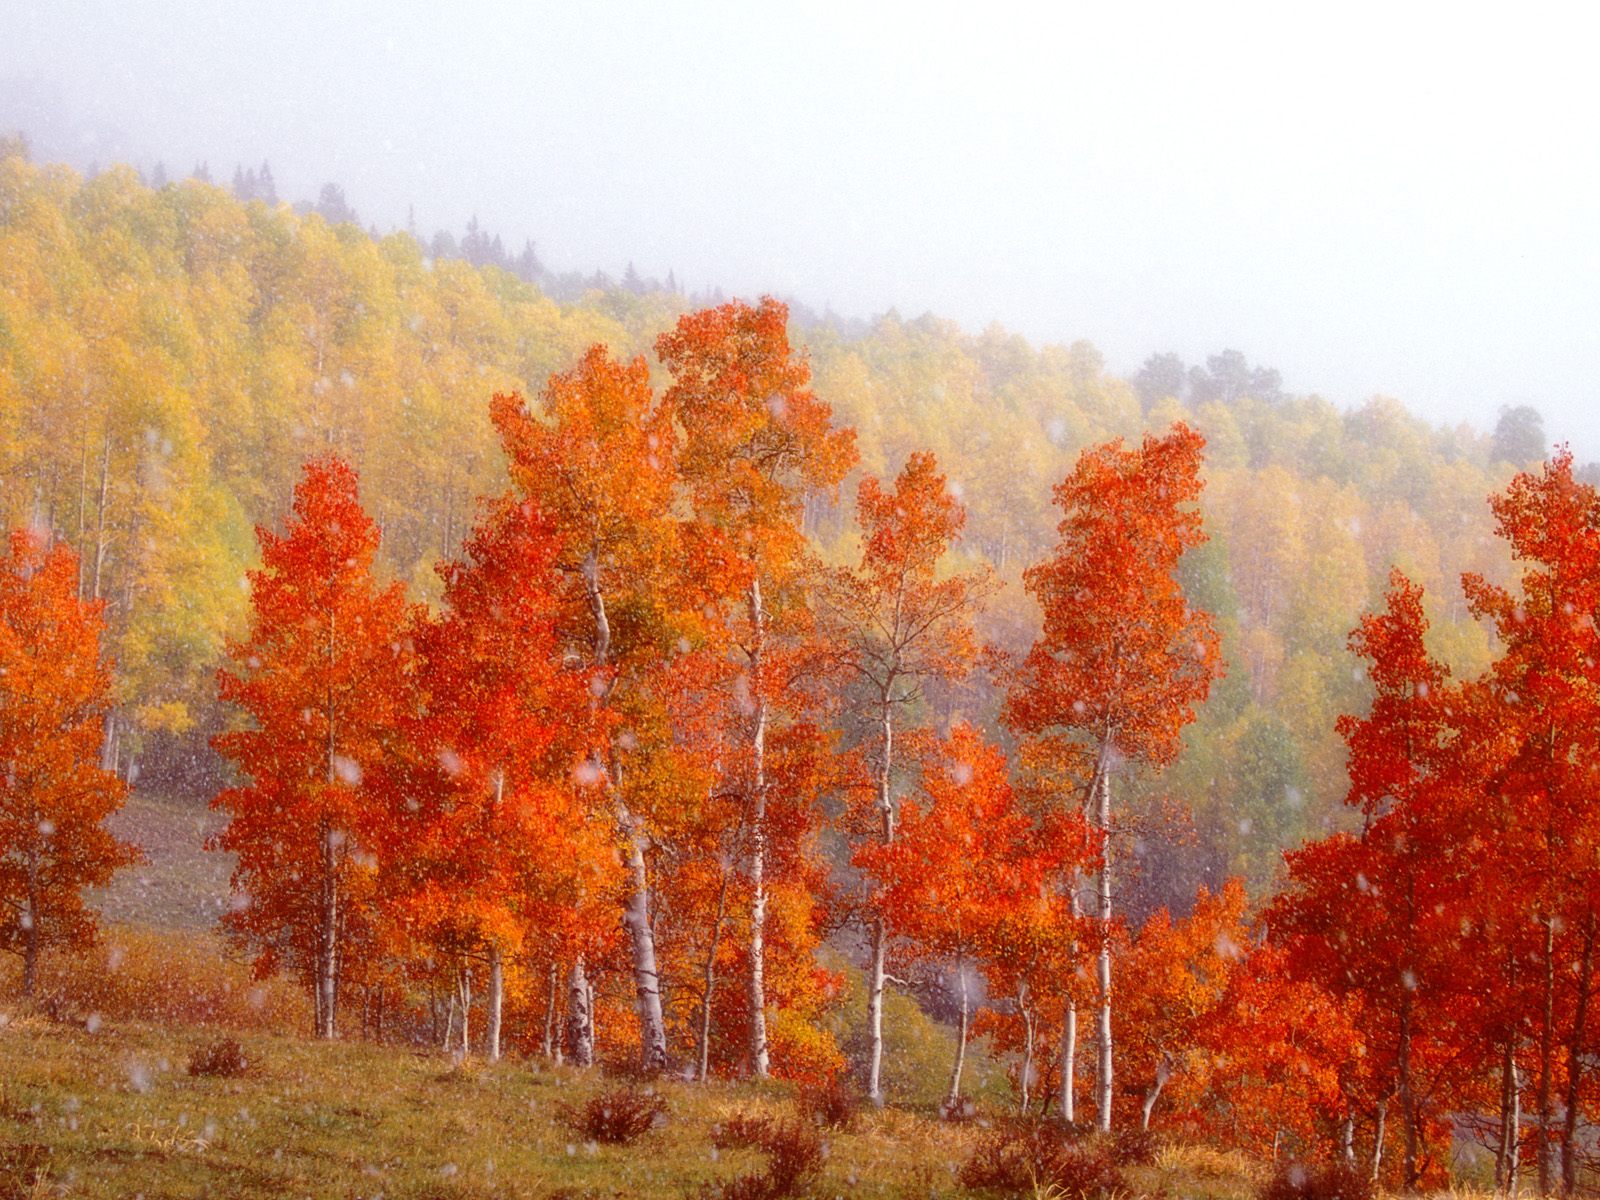 The Autumn Wallpaper Category Of HD Scenery